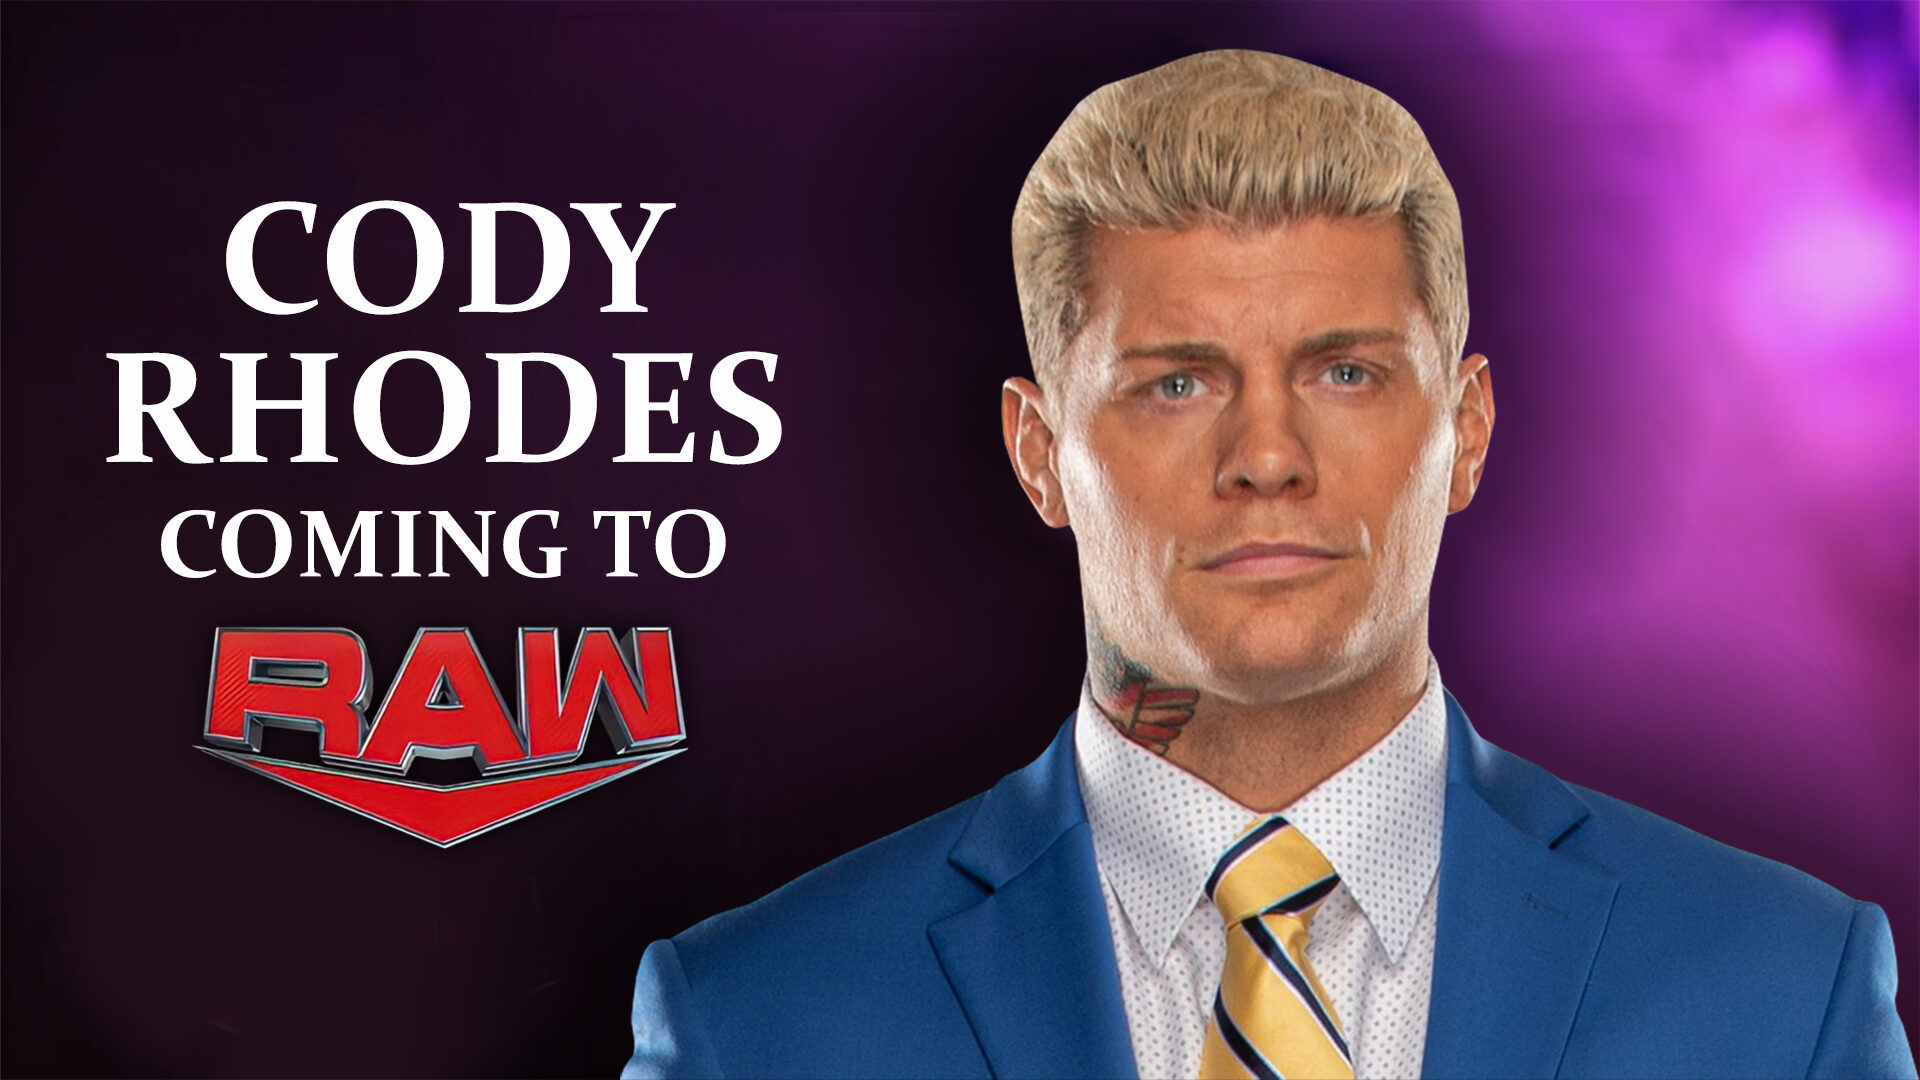 Cody Rhodes Signs With WWE